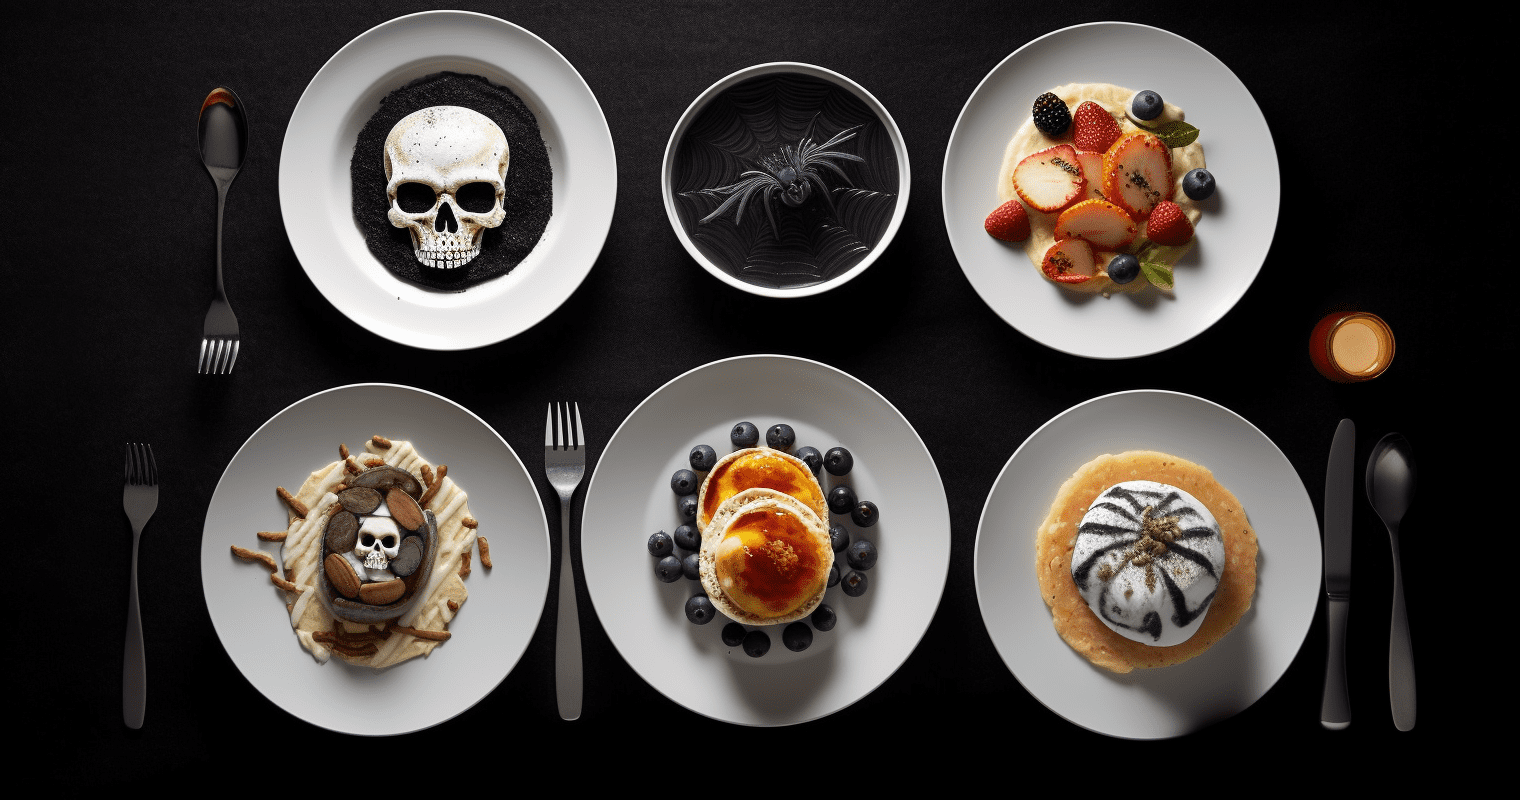 Get into the Halloween spirit with these hauntingly delicious Ghostly Pancakes